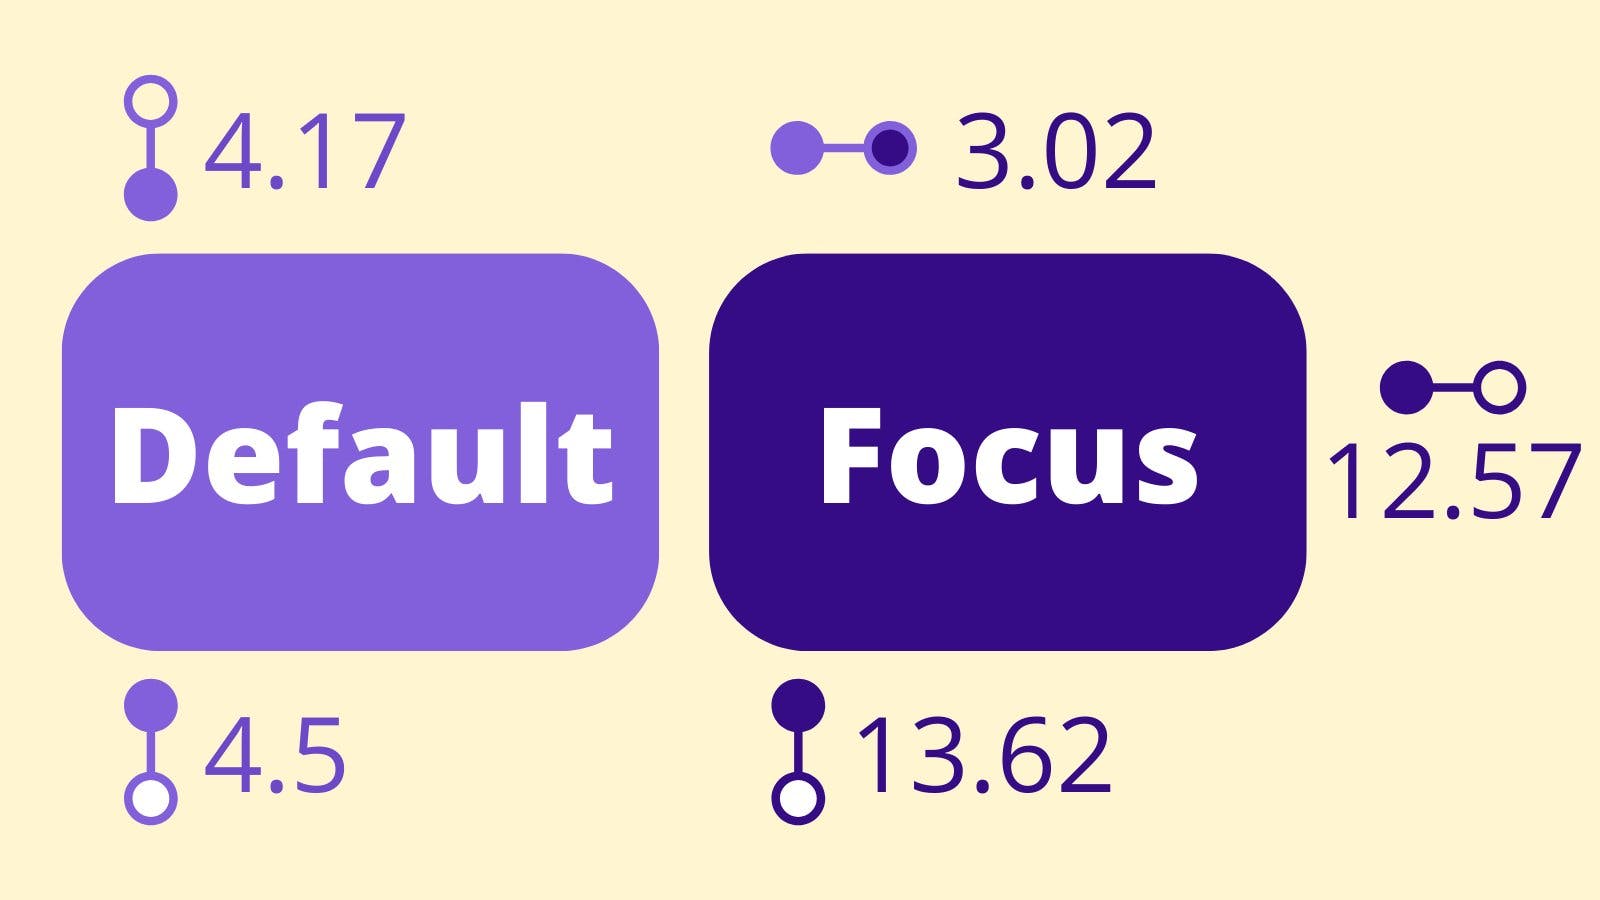 An infographic showing a "default" button that is midrange shade of purple with white letters next to its "focus" state which is a darker purple. Icons and labels show that the contrast of the default purple to the light yellow page background is 4.17, from the default purple to the white text is 4.5. For the focus button, there is a 3.02 contrast between the default purple background and the focus purple background, and 13.62 between focus purple and the white button text, and 12.57 between the focus purple and the page background light yellow.